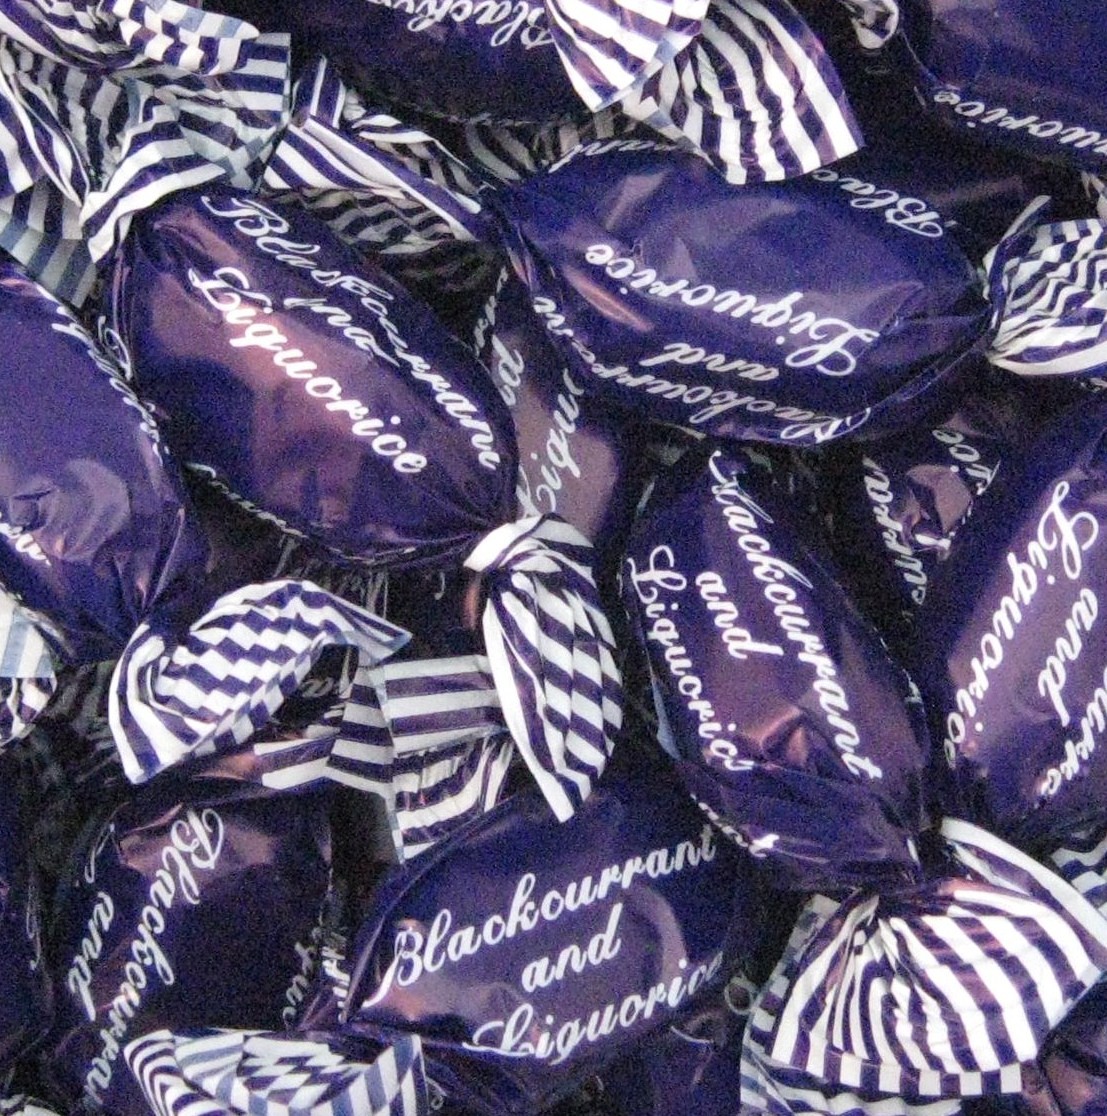 BLACKCURRANT & LIQUORICE   (3 varieties to choose from)